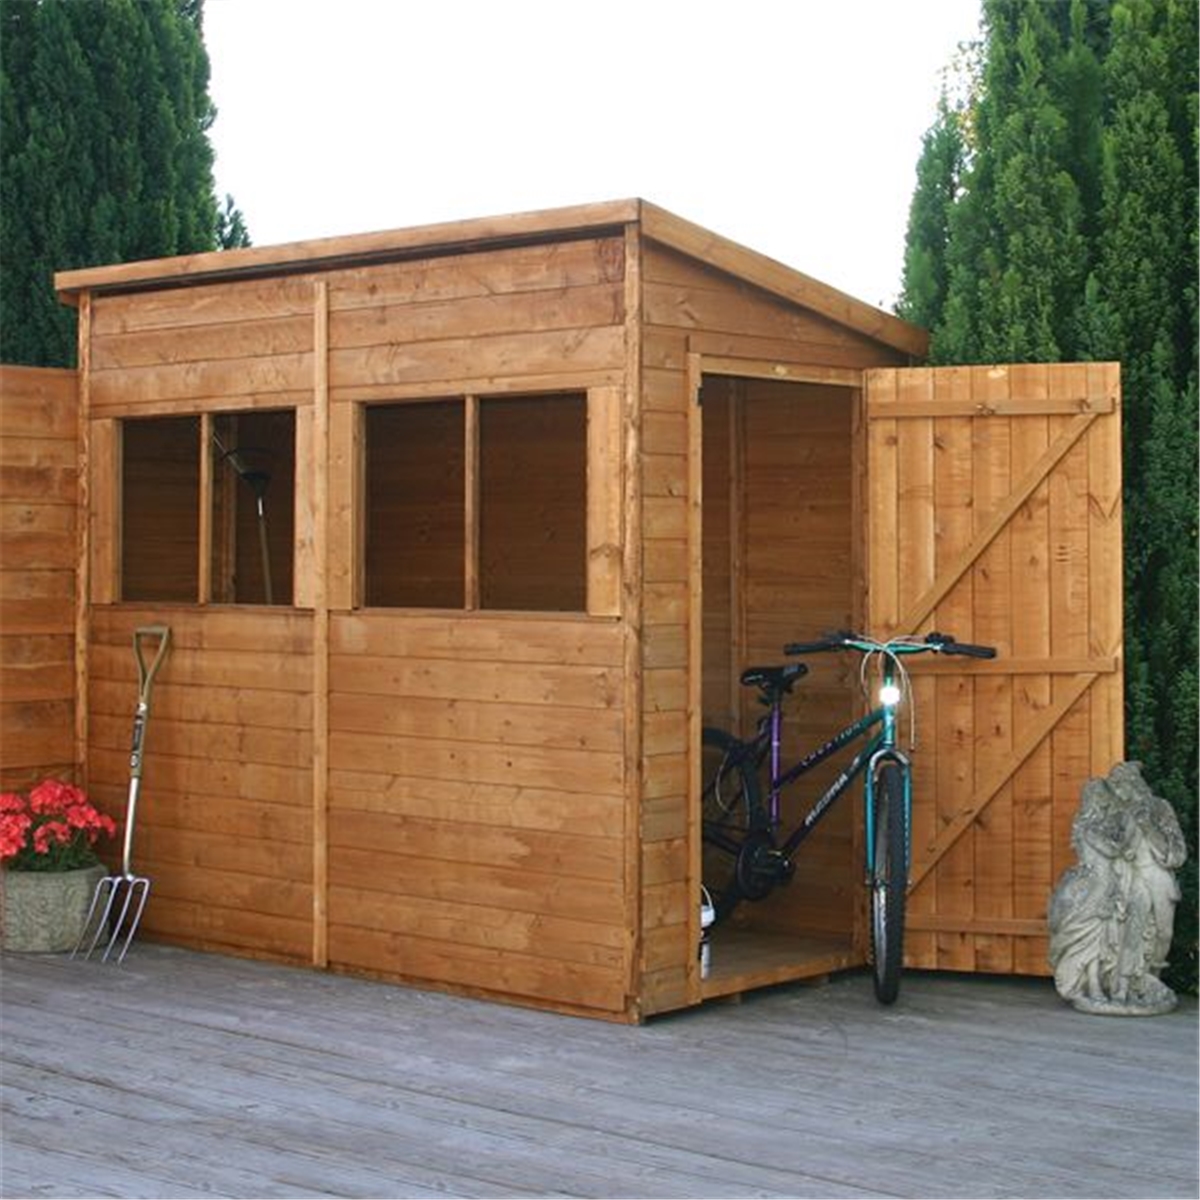 8 x 4 Premier Tongue and Groove Pent Shed With 4 Windows ...